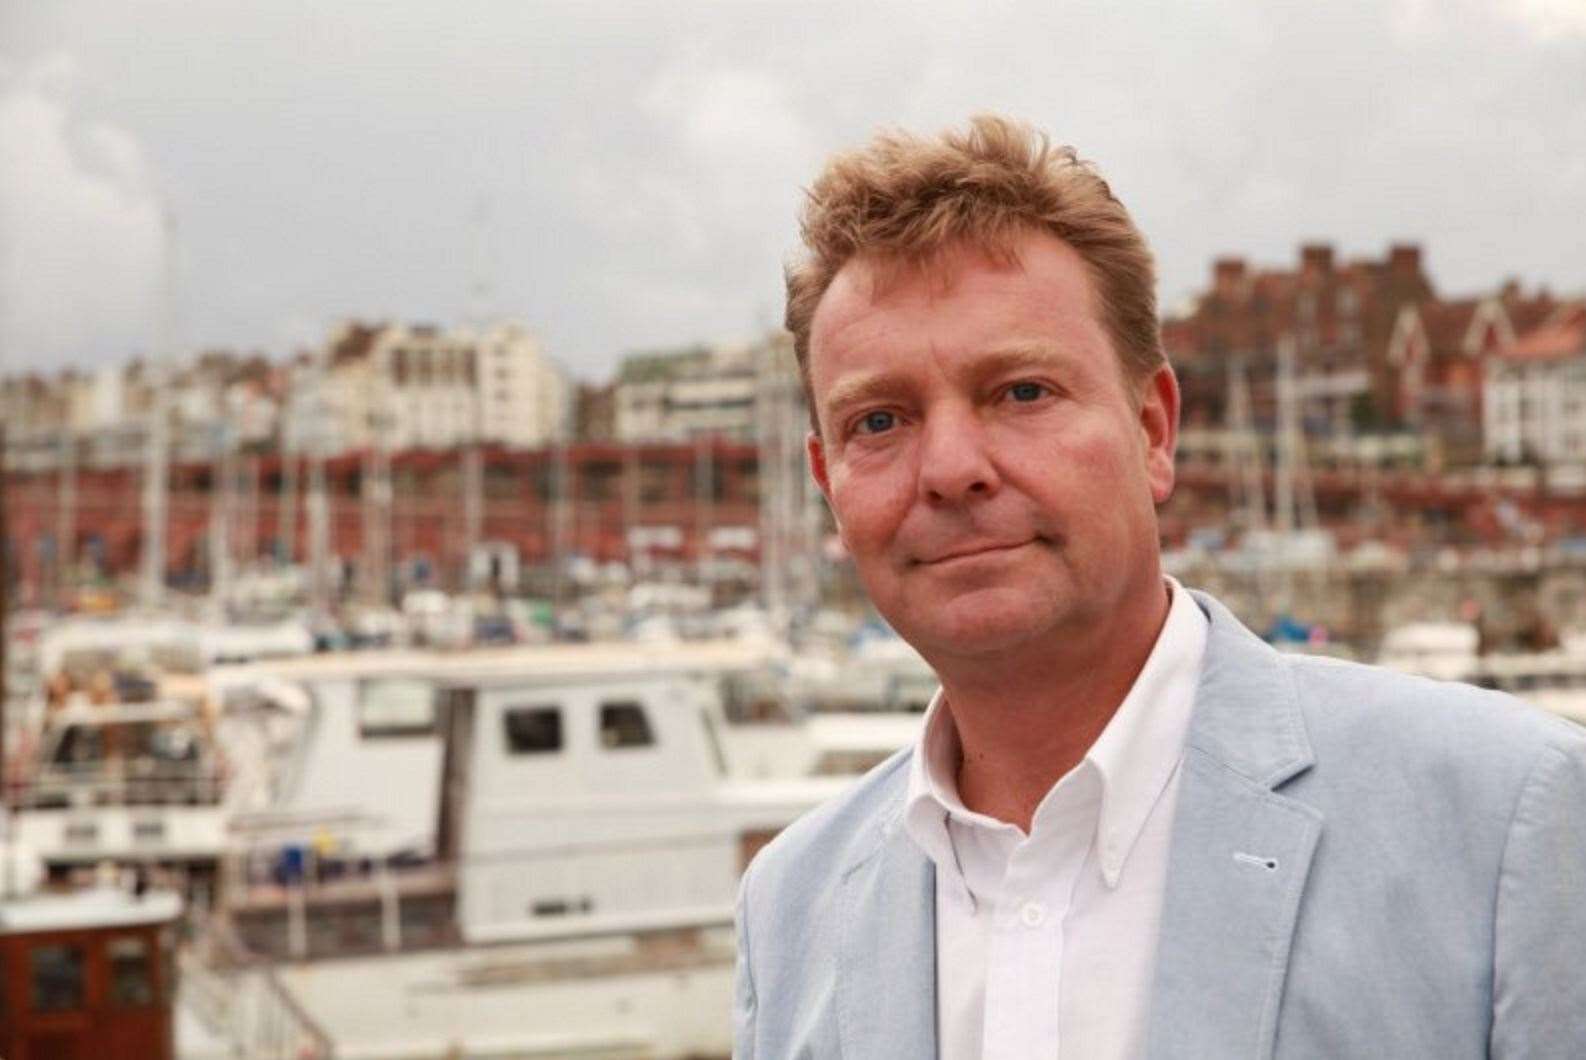 Craig Mackinlay said the decision was 'disappointing'